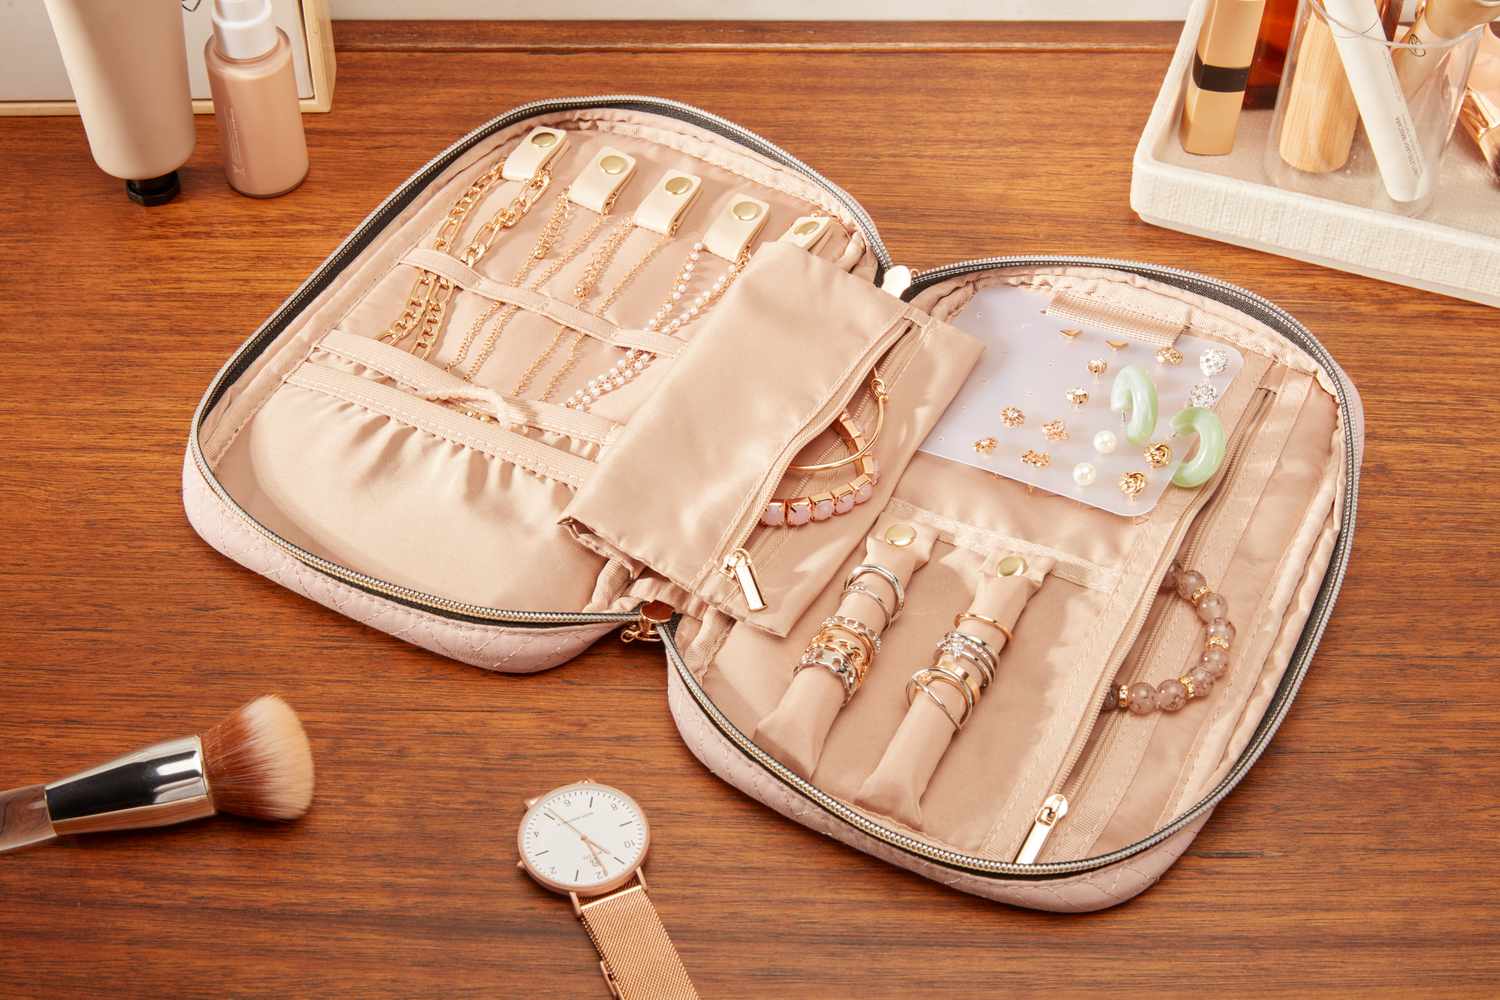 The Bagsmart Jewelry Organizer Bag filled with different types of jewerly.